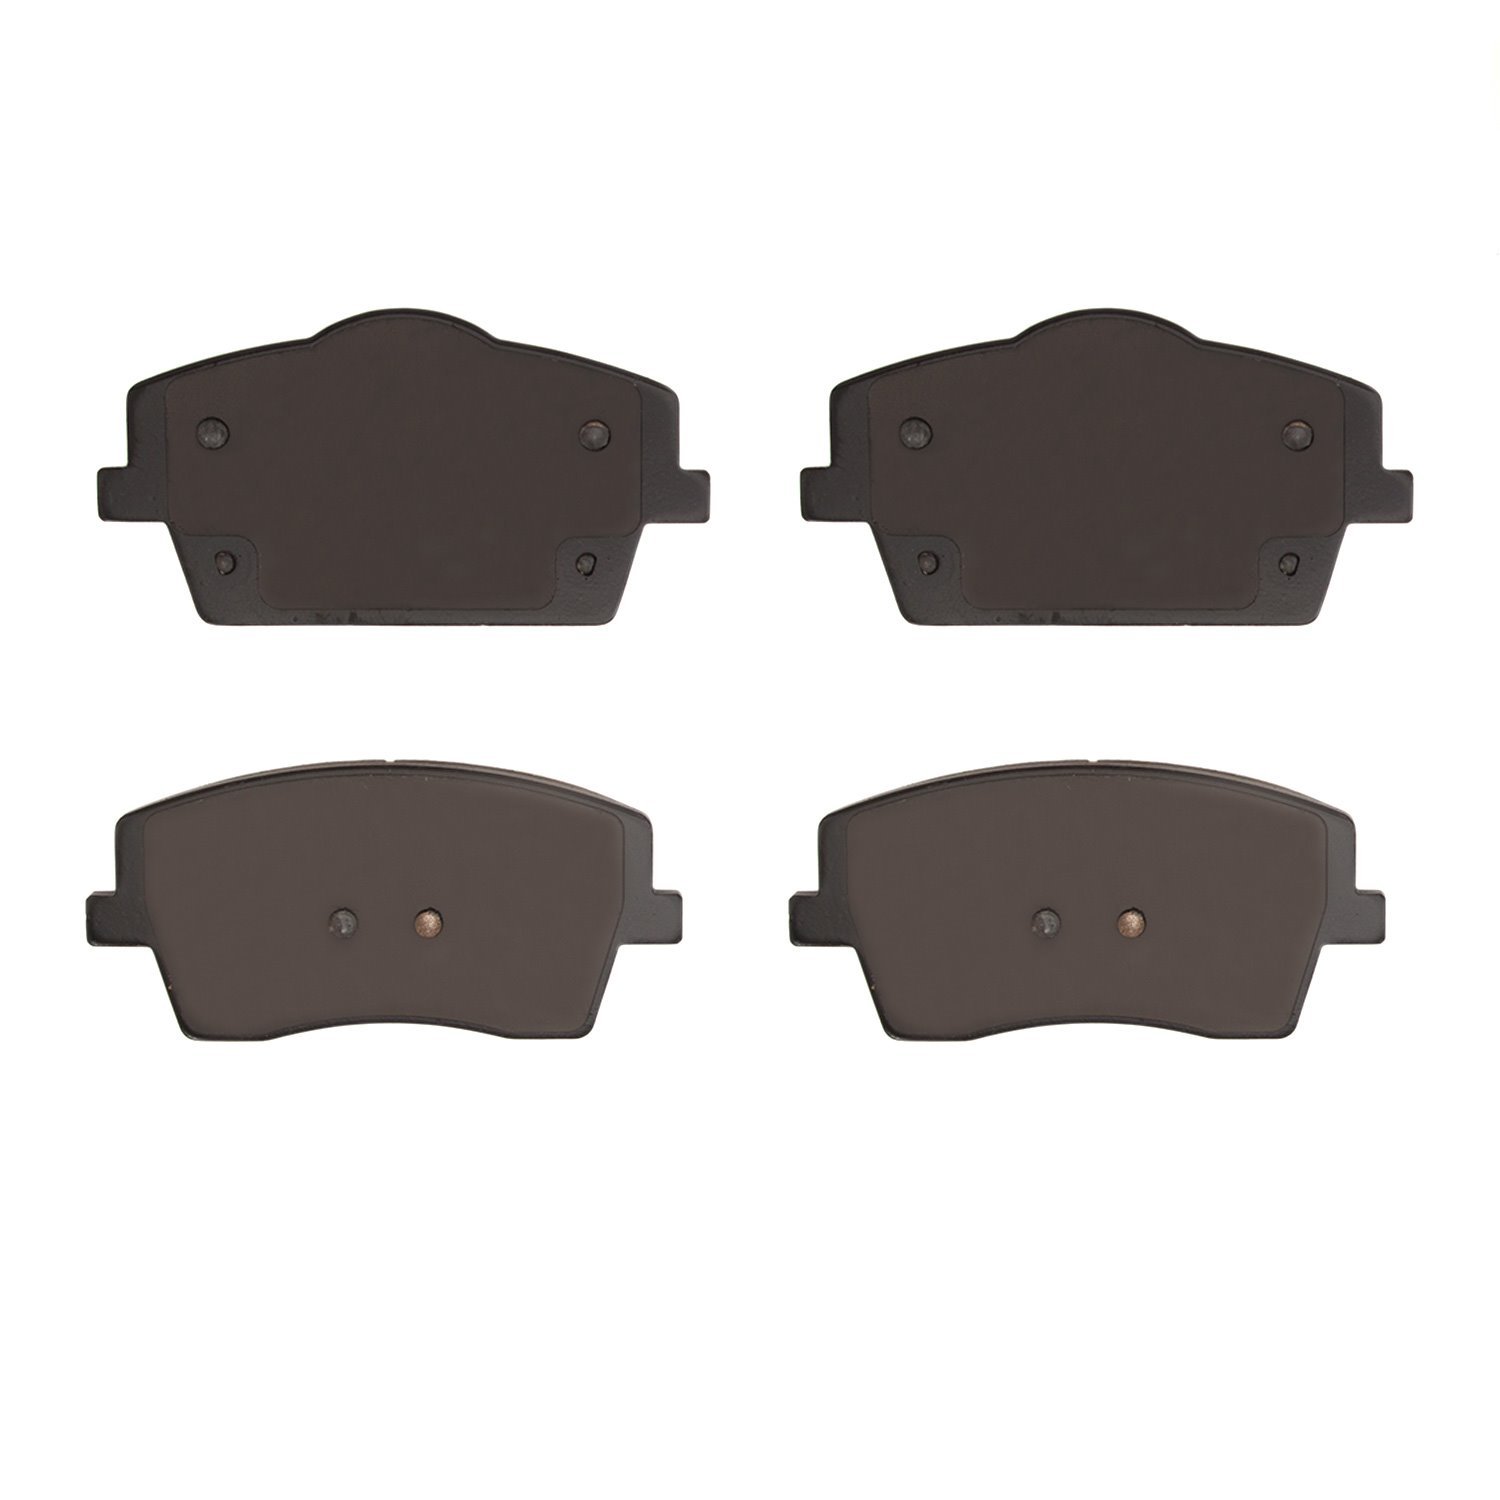 1600-2137-00 5000 Euro Ceramic Brake Pads, Fits Select Volvo, Position: Front